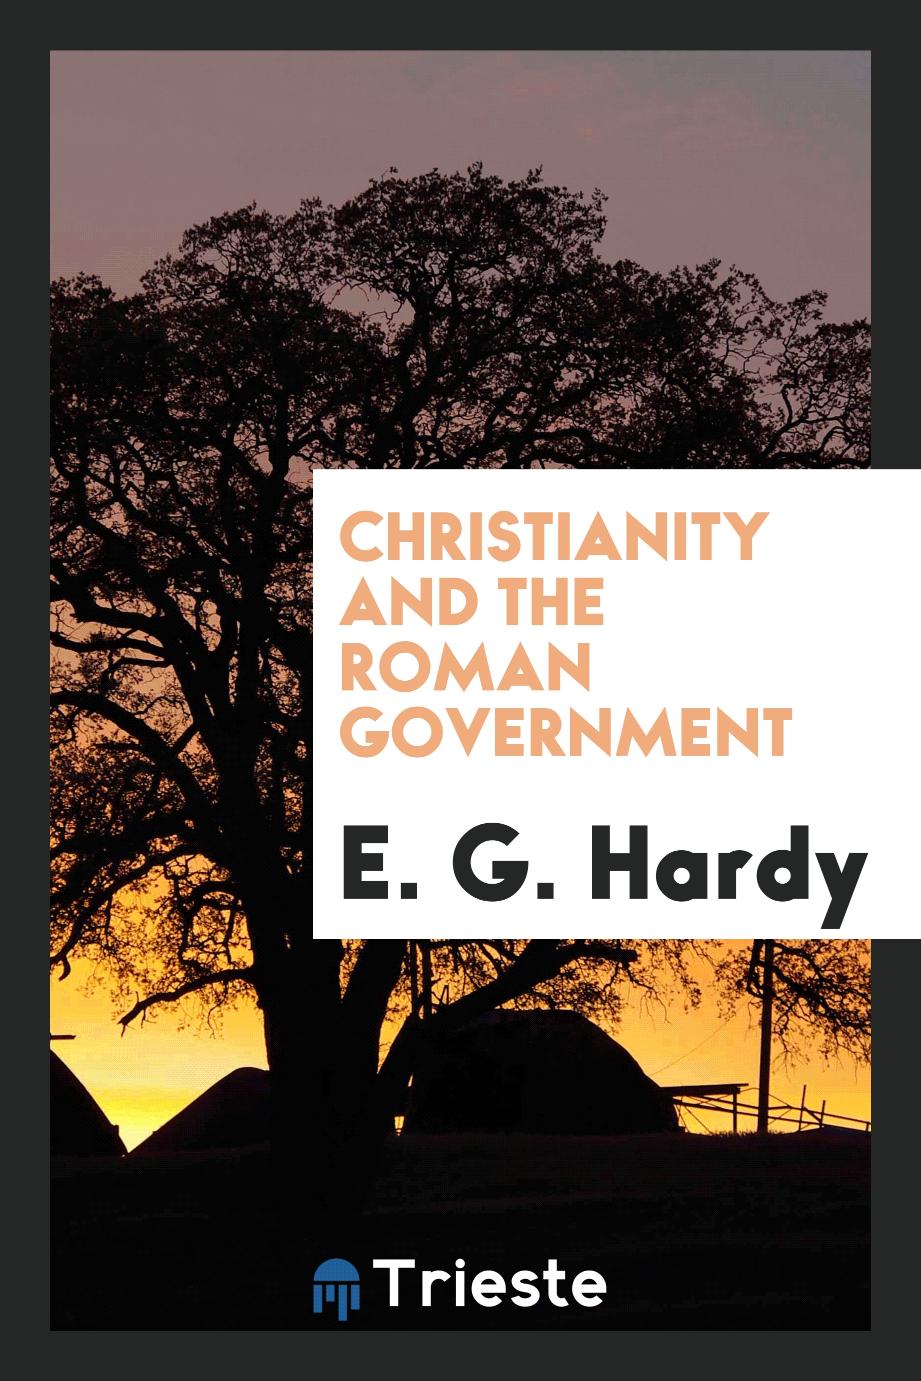 Christianity and the Roman government